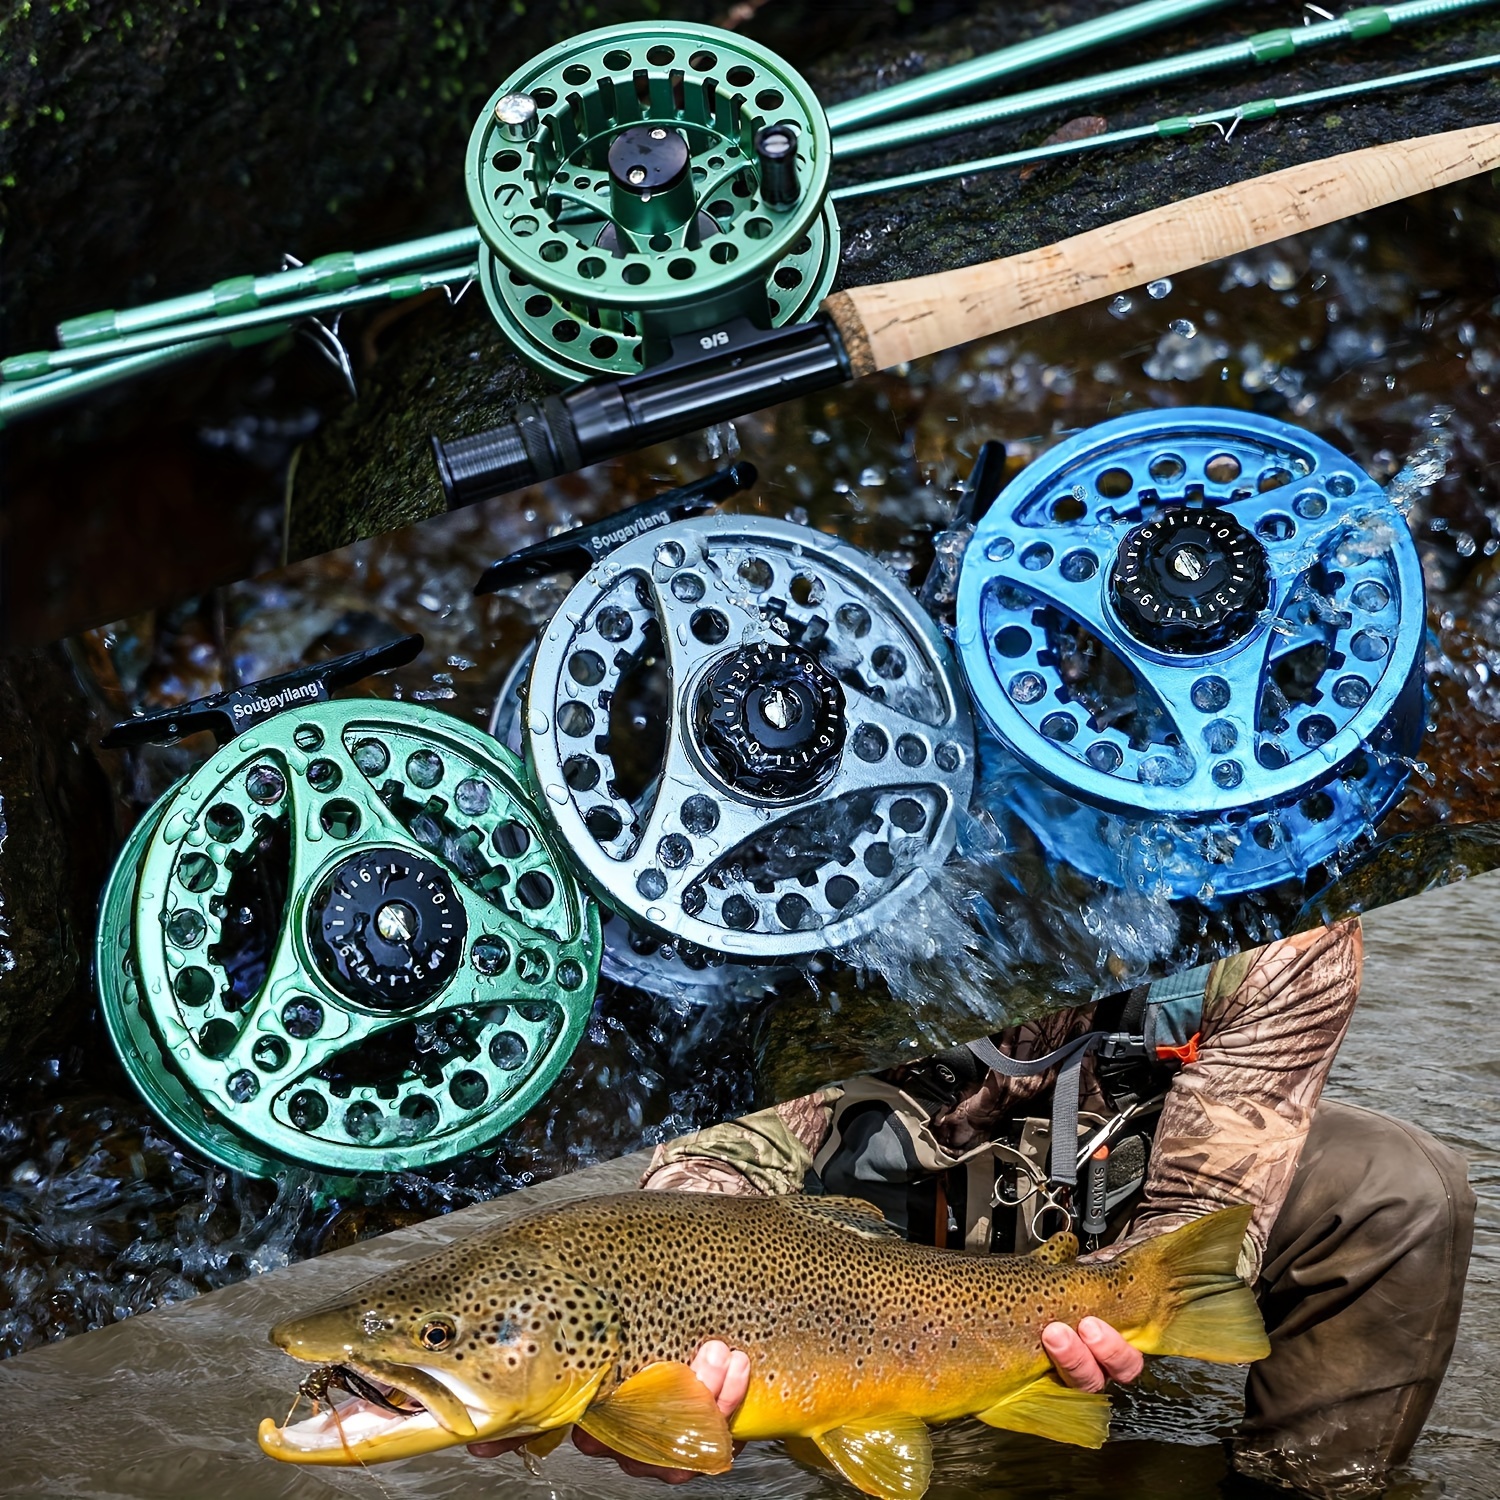 Sougayilang Fly Fishing Reel 2+1 BB #5/6 #7/8 Fishing Reel with  CNC-Machined Aluminum Alloy Body Fly Reels Fishing Tackle